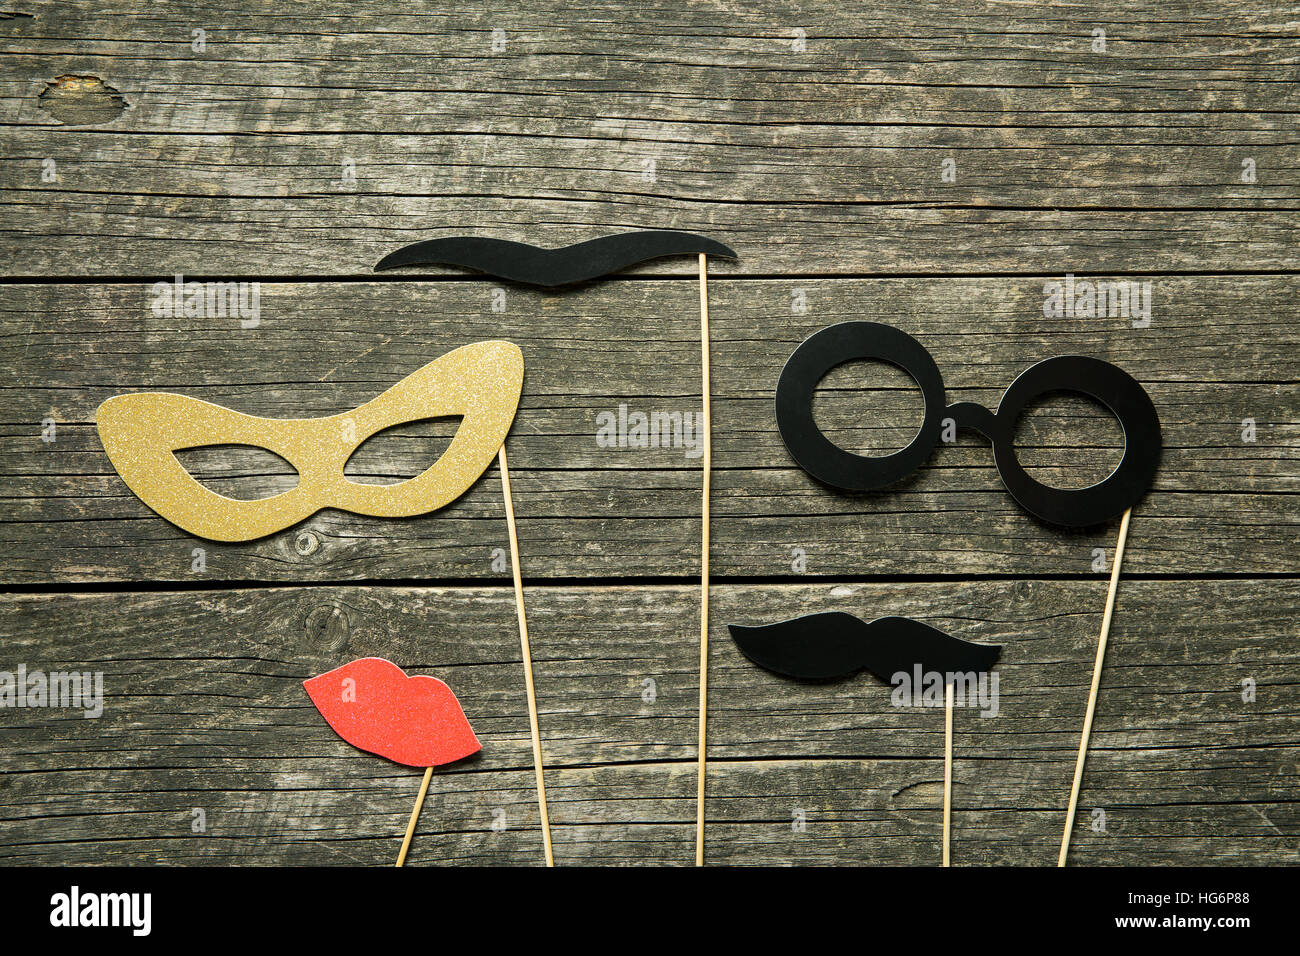 Fake lips, glasses and mustaches on sticks on old wooden background. Stock Photo